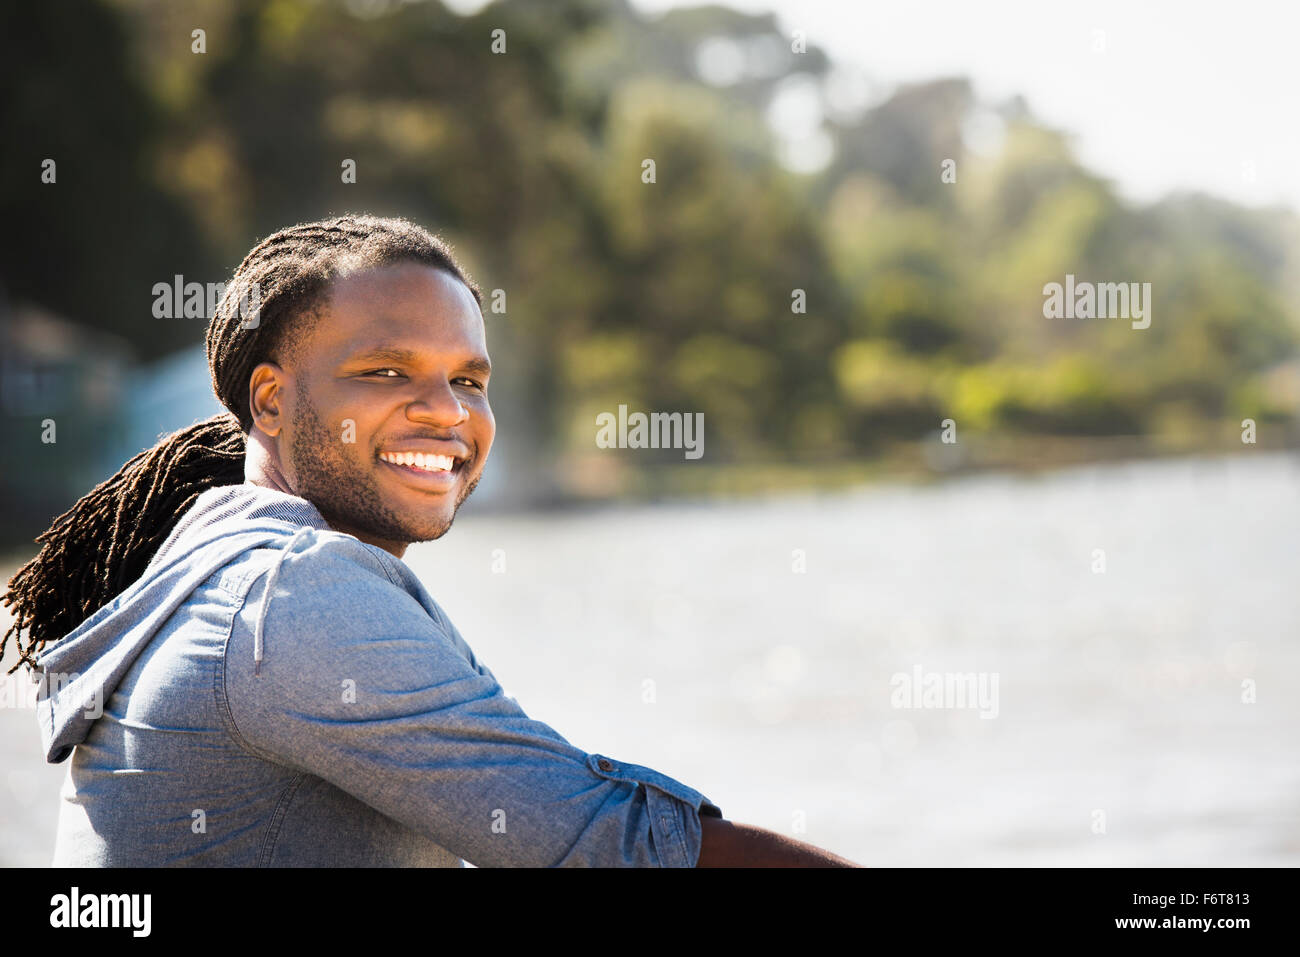 African American man smiling outdoors Stock Photo